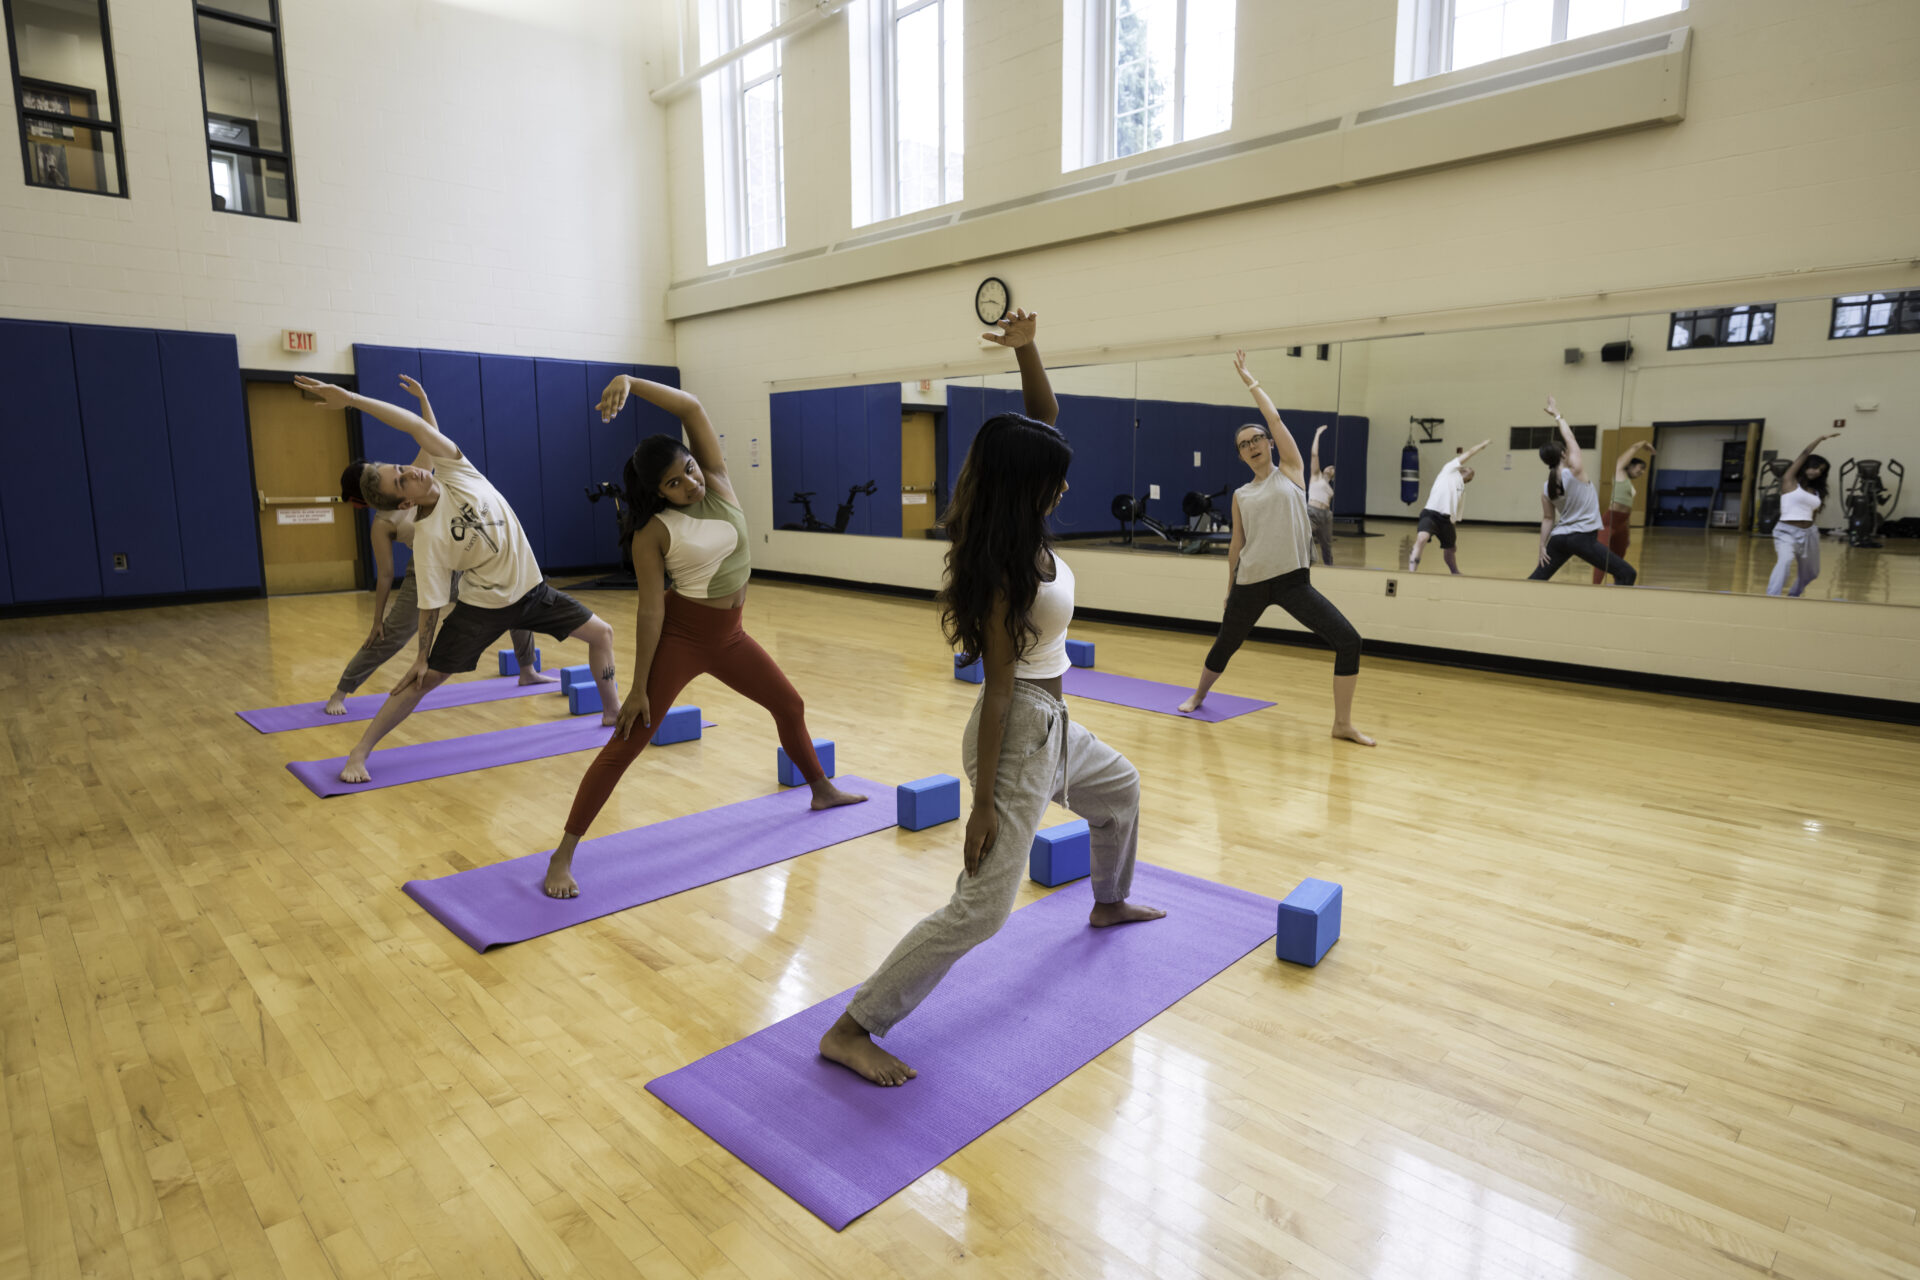 Students practicing yoga facing toward a wall with a mirror, with an instructor at the front of the room